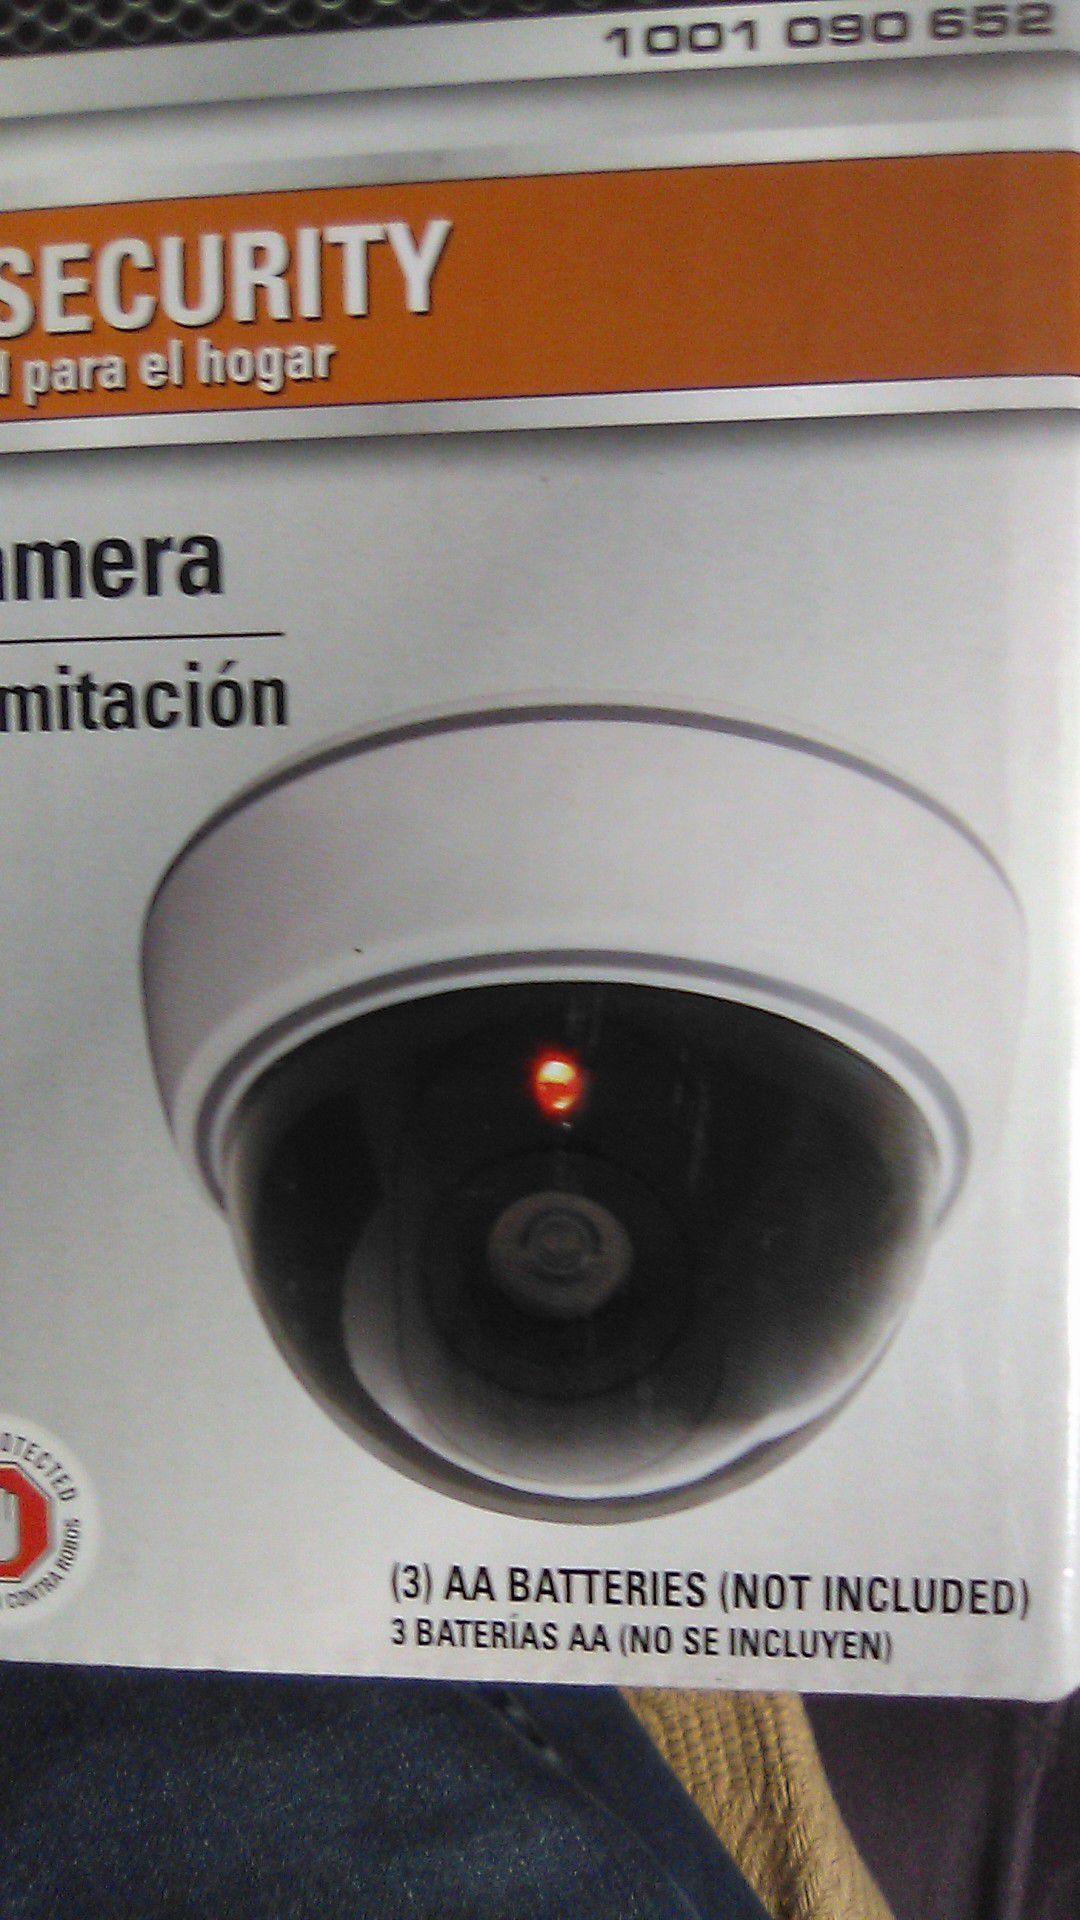 Defiant Brand, Home Security Camera, Indoor/Outdoor, No wiring required, Brand New*